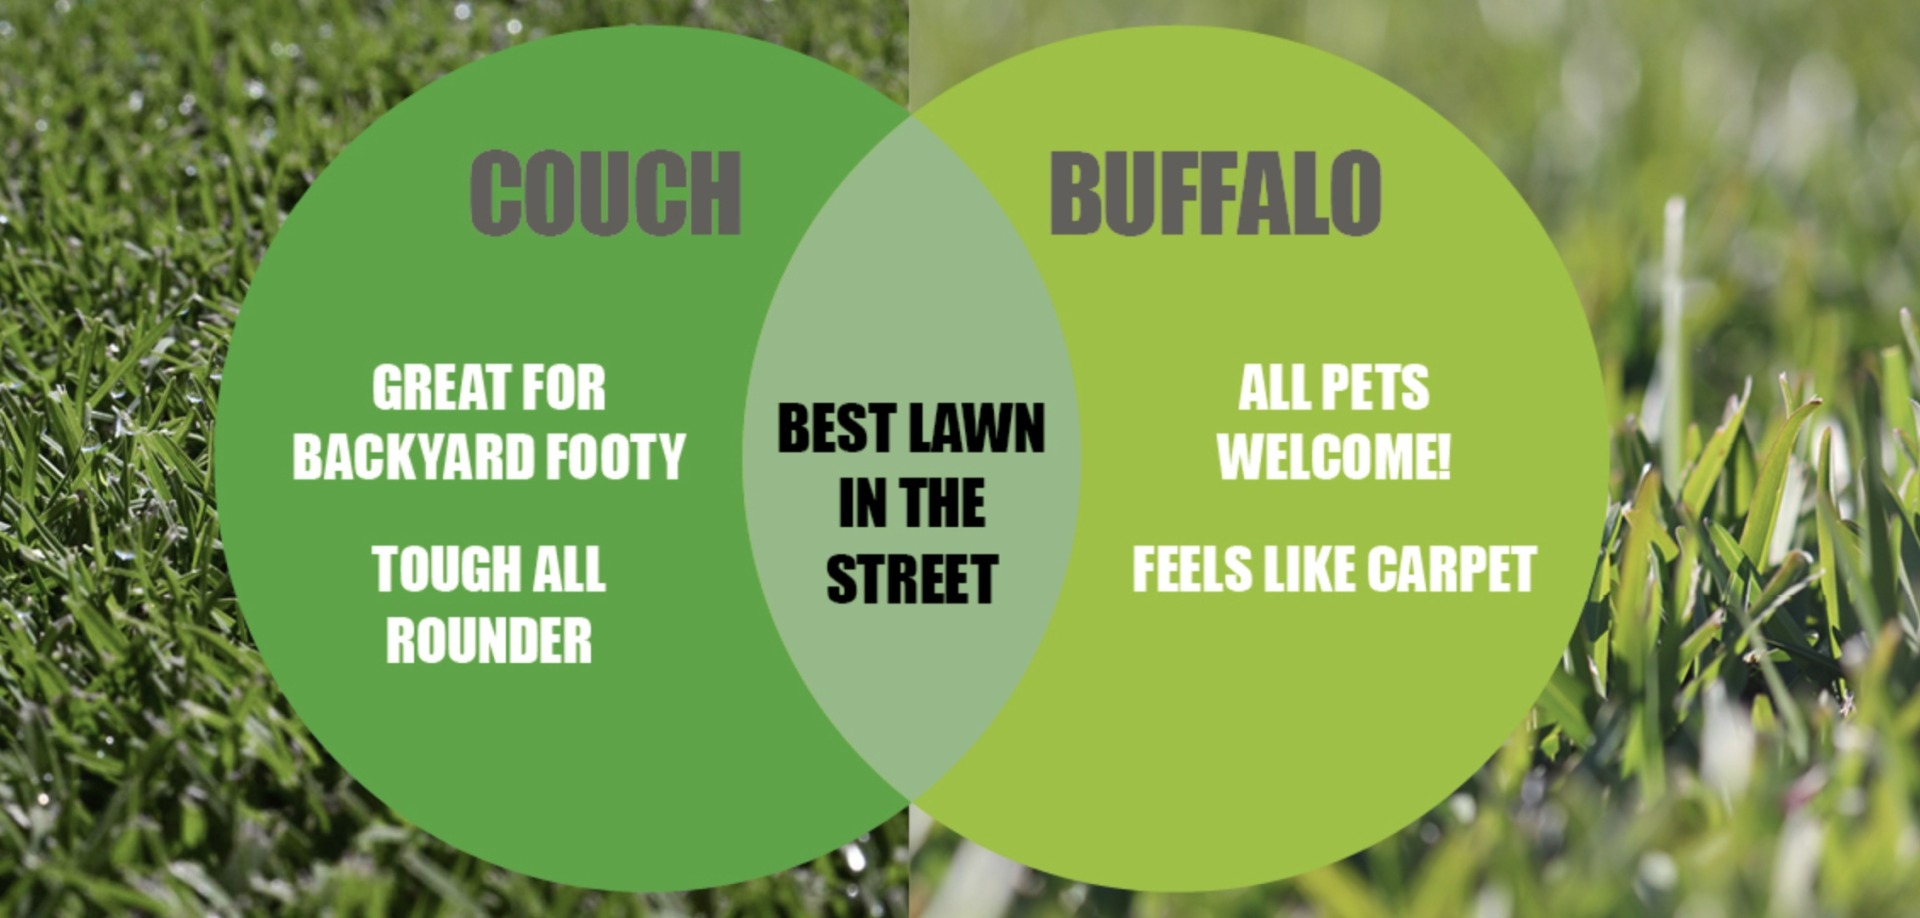 Couch and Buffalo Lawns